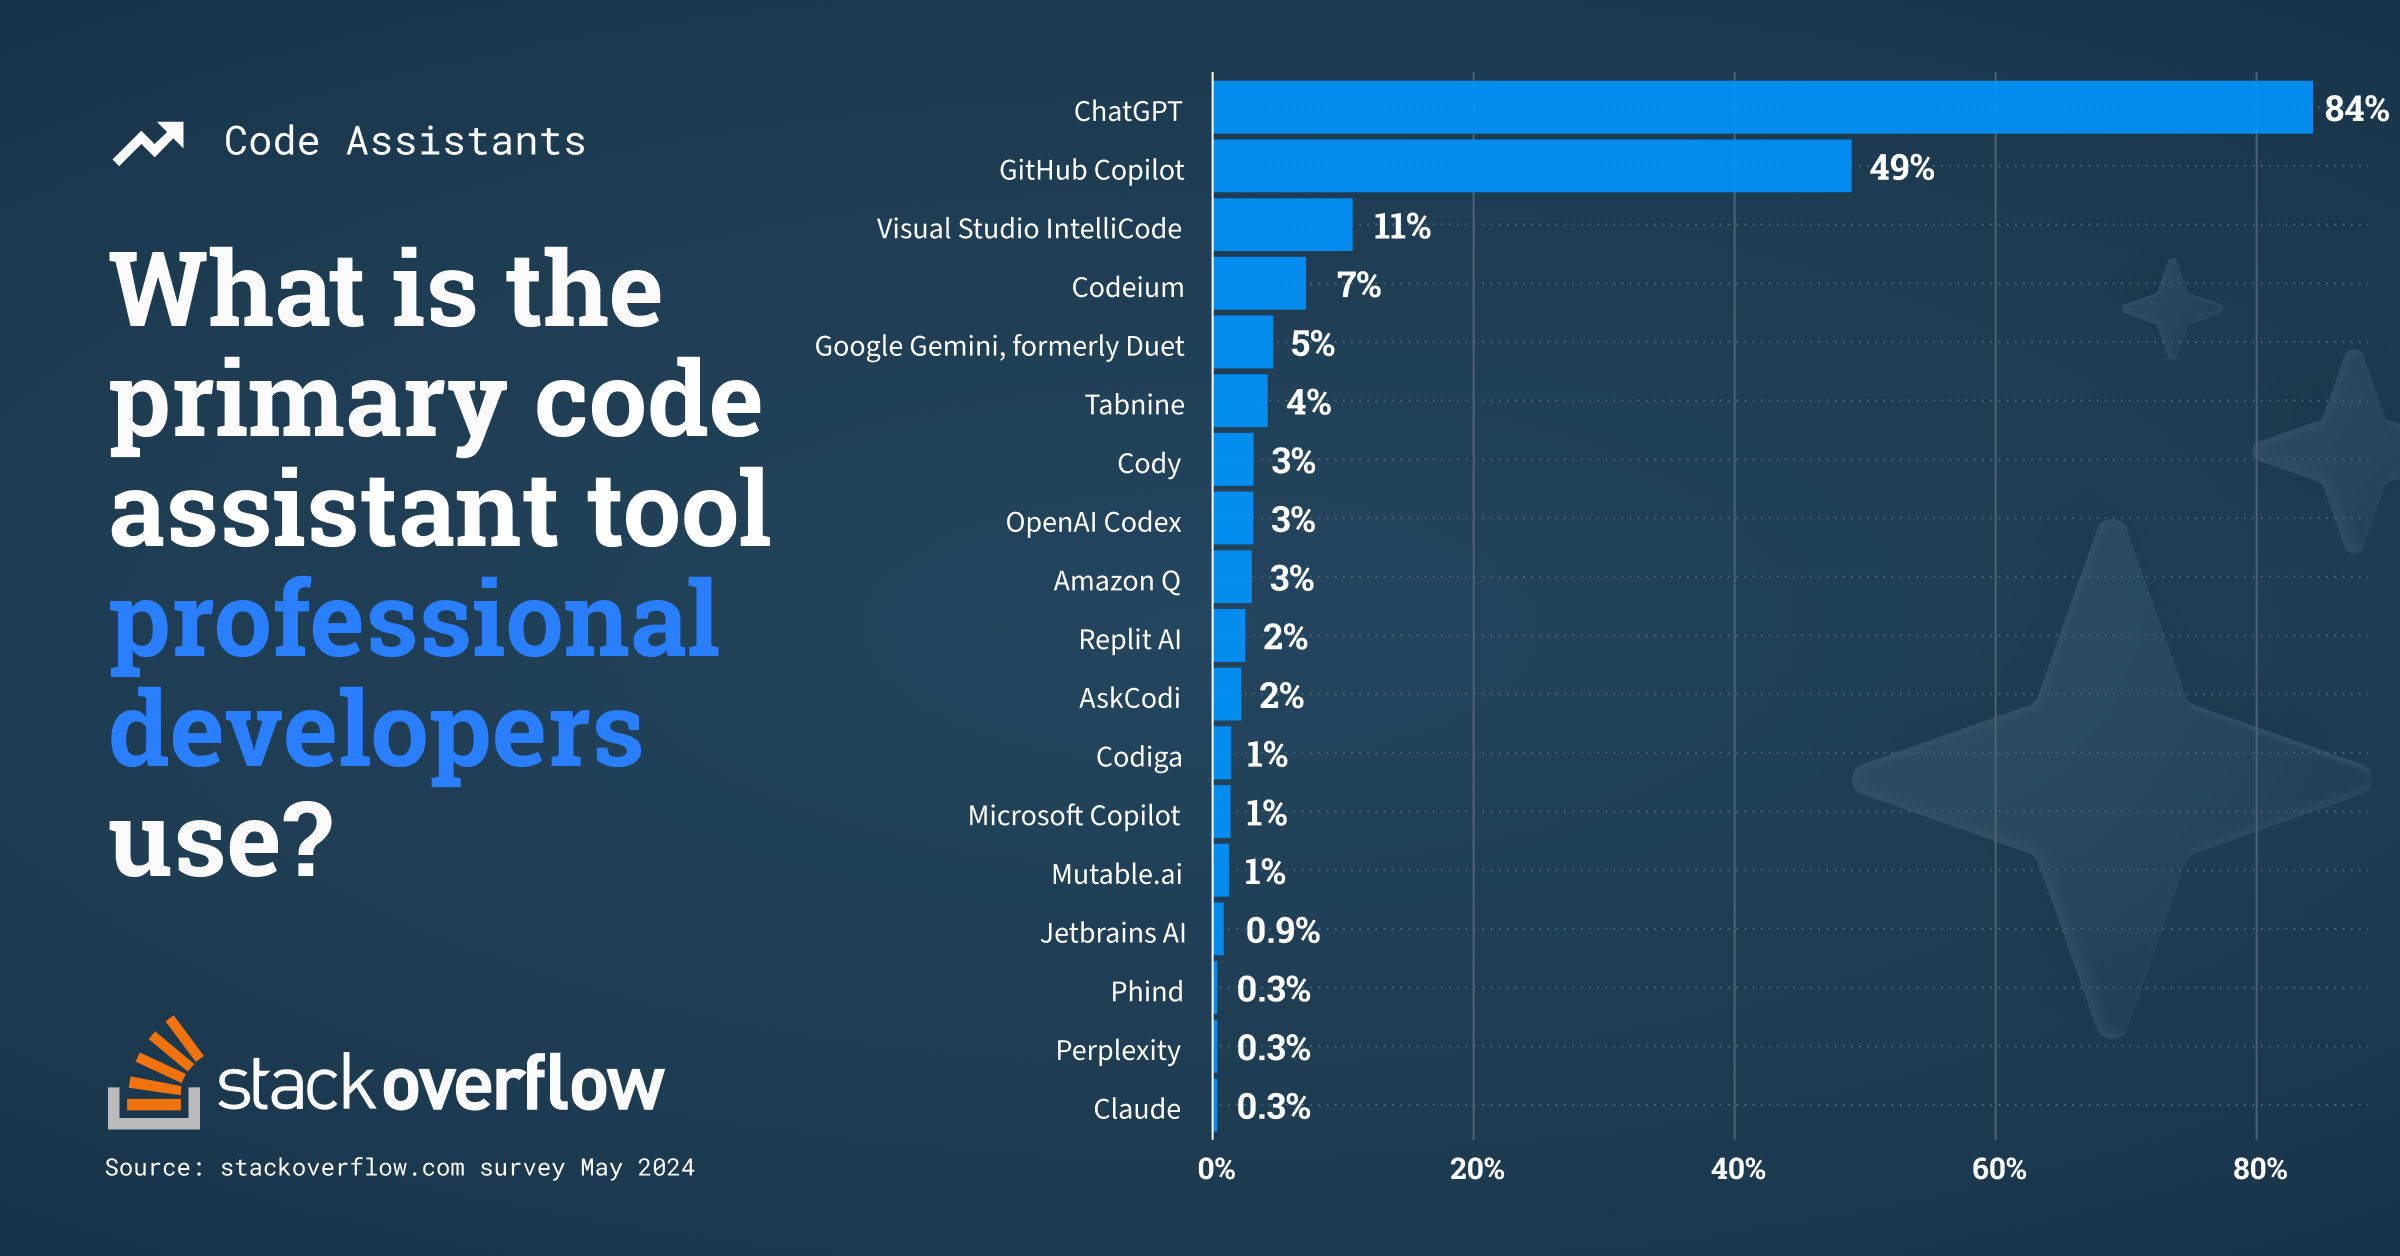 Bar chart showing code assistants professional developers use the most; 84% use ChatGPT, 49% use GutHub Copilot and 11% use Visual Studio Intellicode.